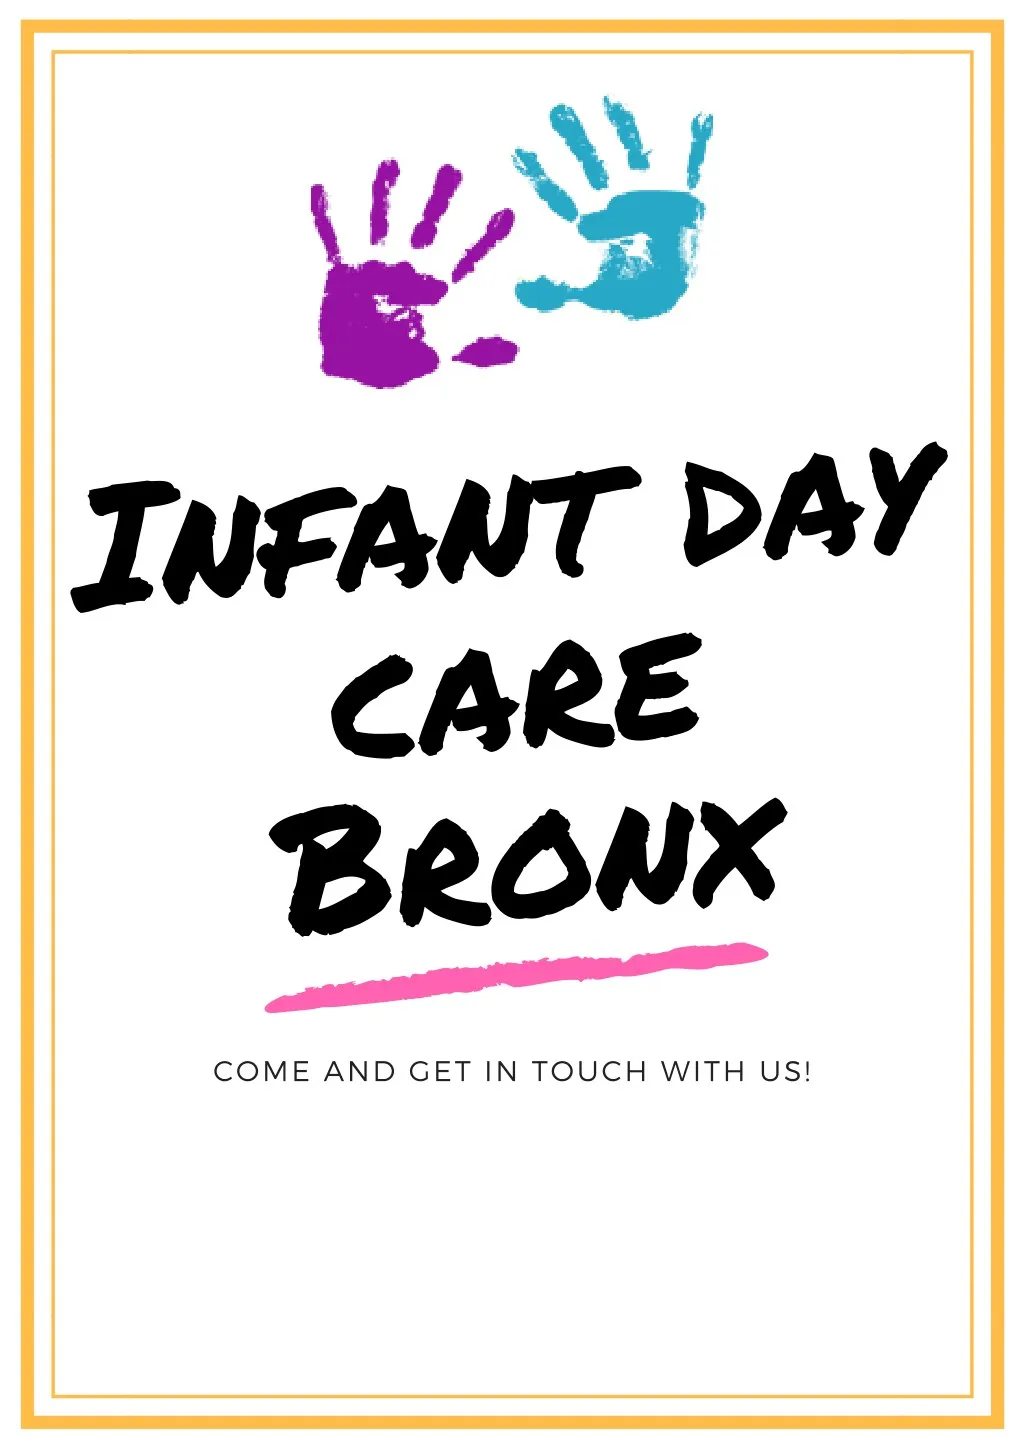 infant day care bronx